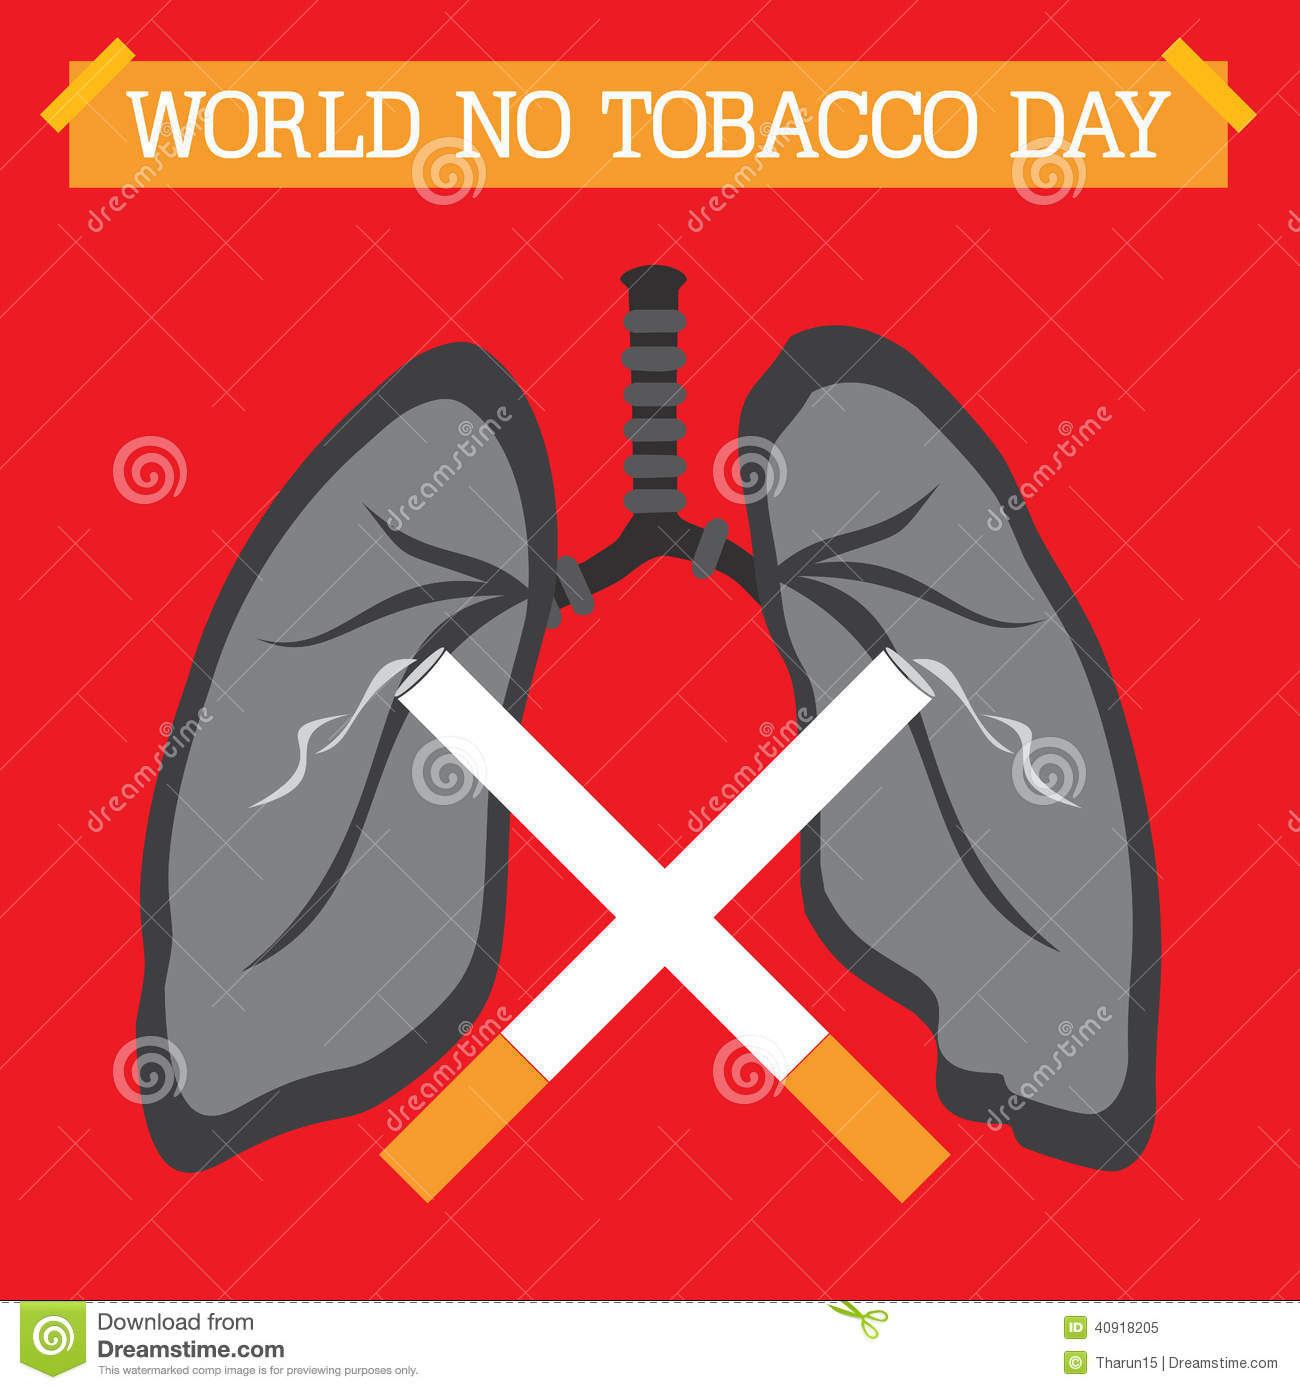 World No Tobacco Day Lungs And Cigarette Illustration